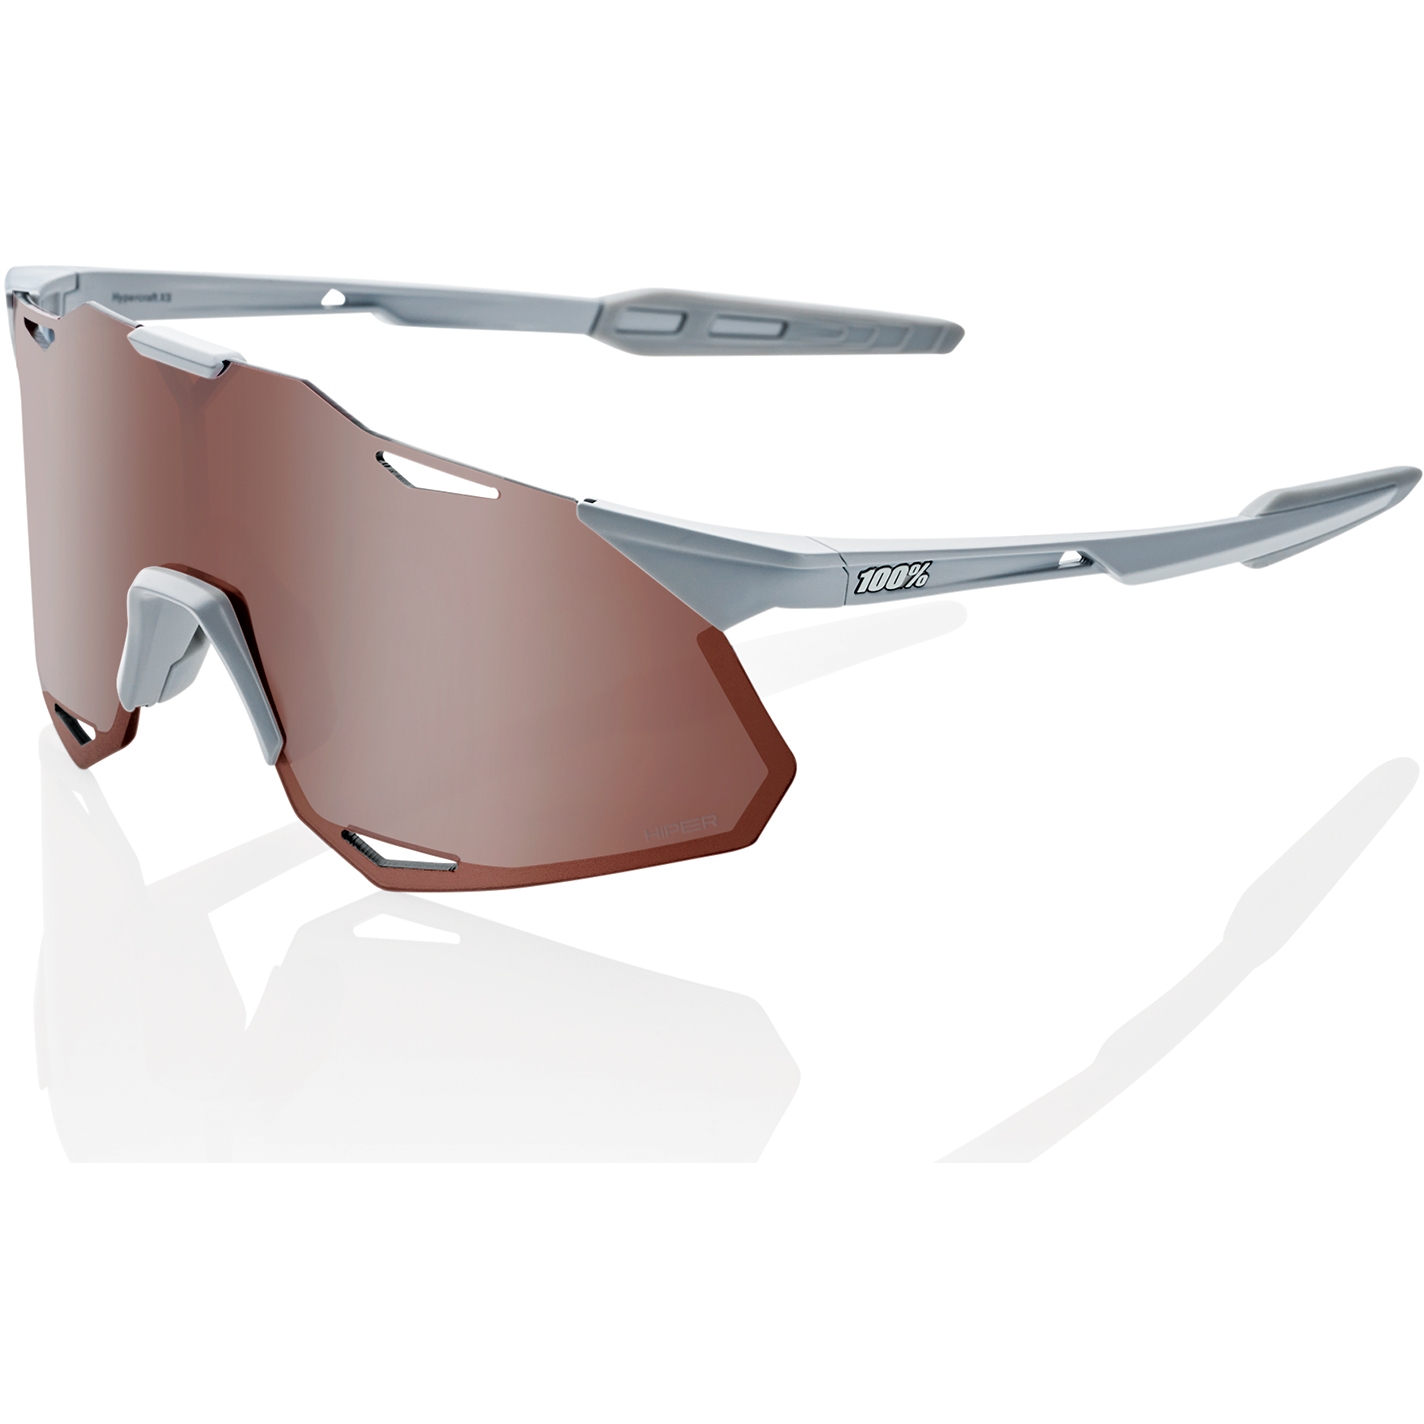 Picture of 100% Hypercraft XS Glasses - HiPER Mirror Lens - Matte Stone Grey / Crimson Silver + Clear